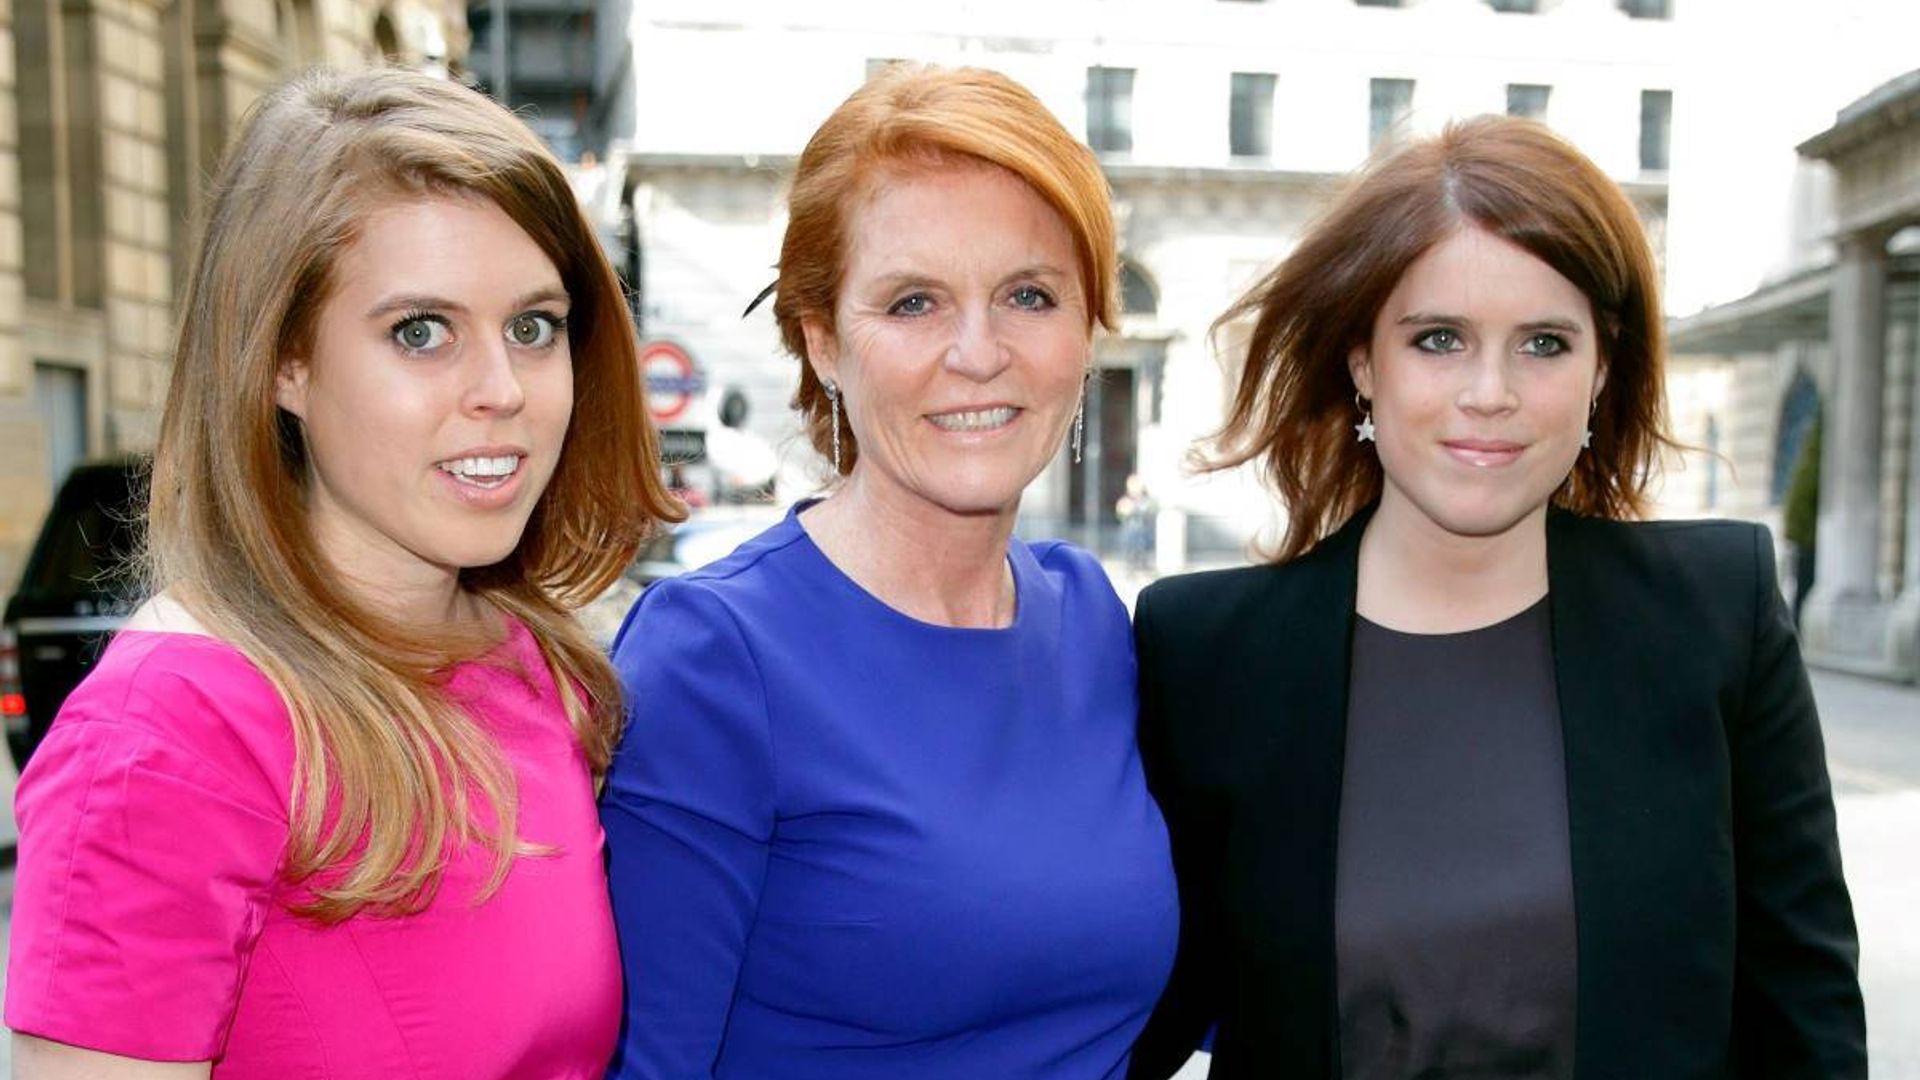 Sarah Ferguson's fans react as she shares unseen childhood photo of Princess Beatrice and Princess Eugenie